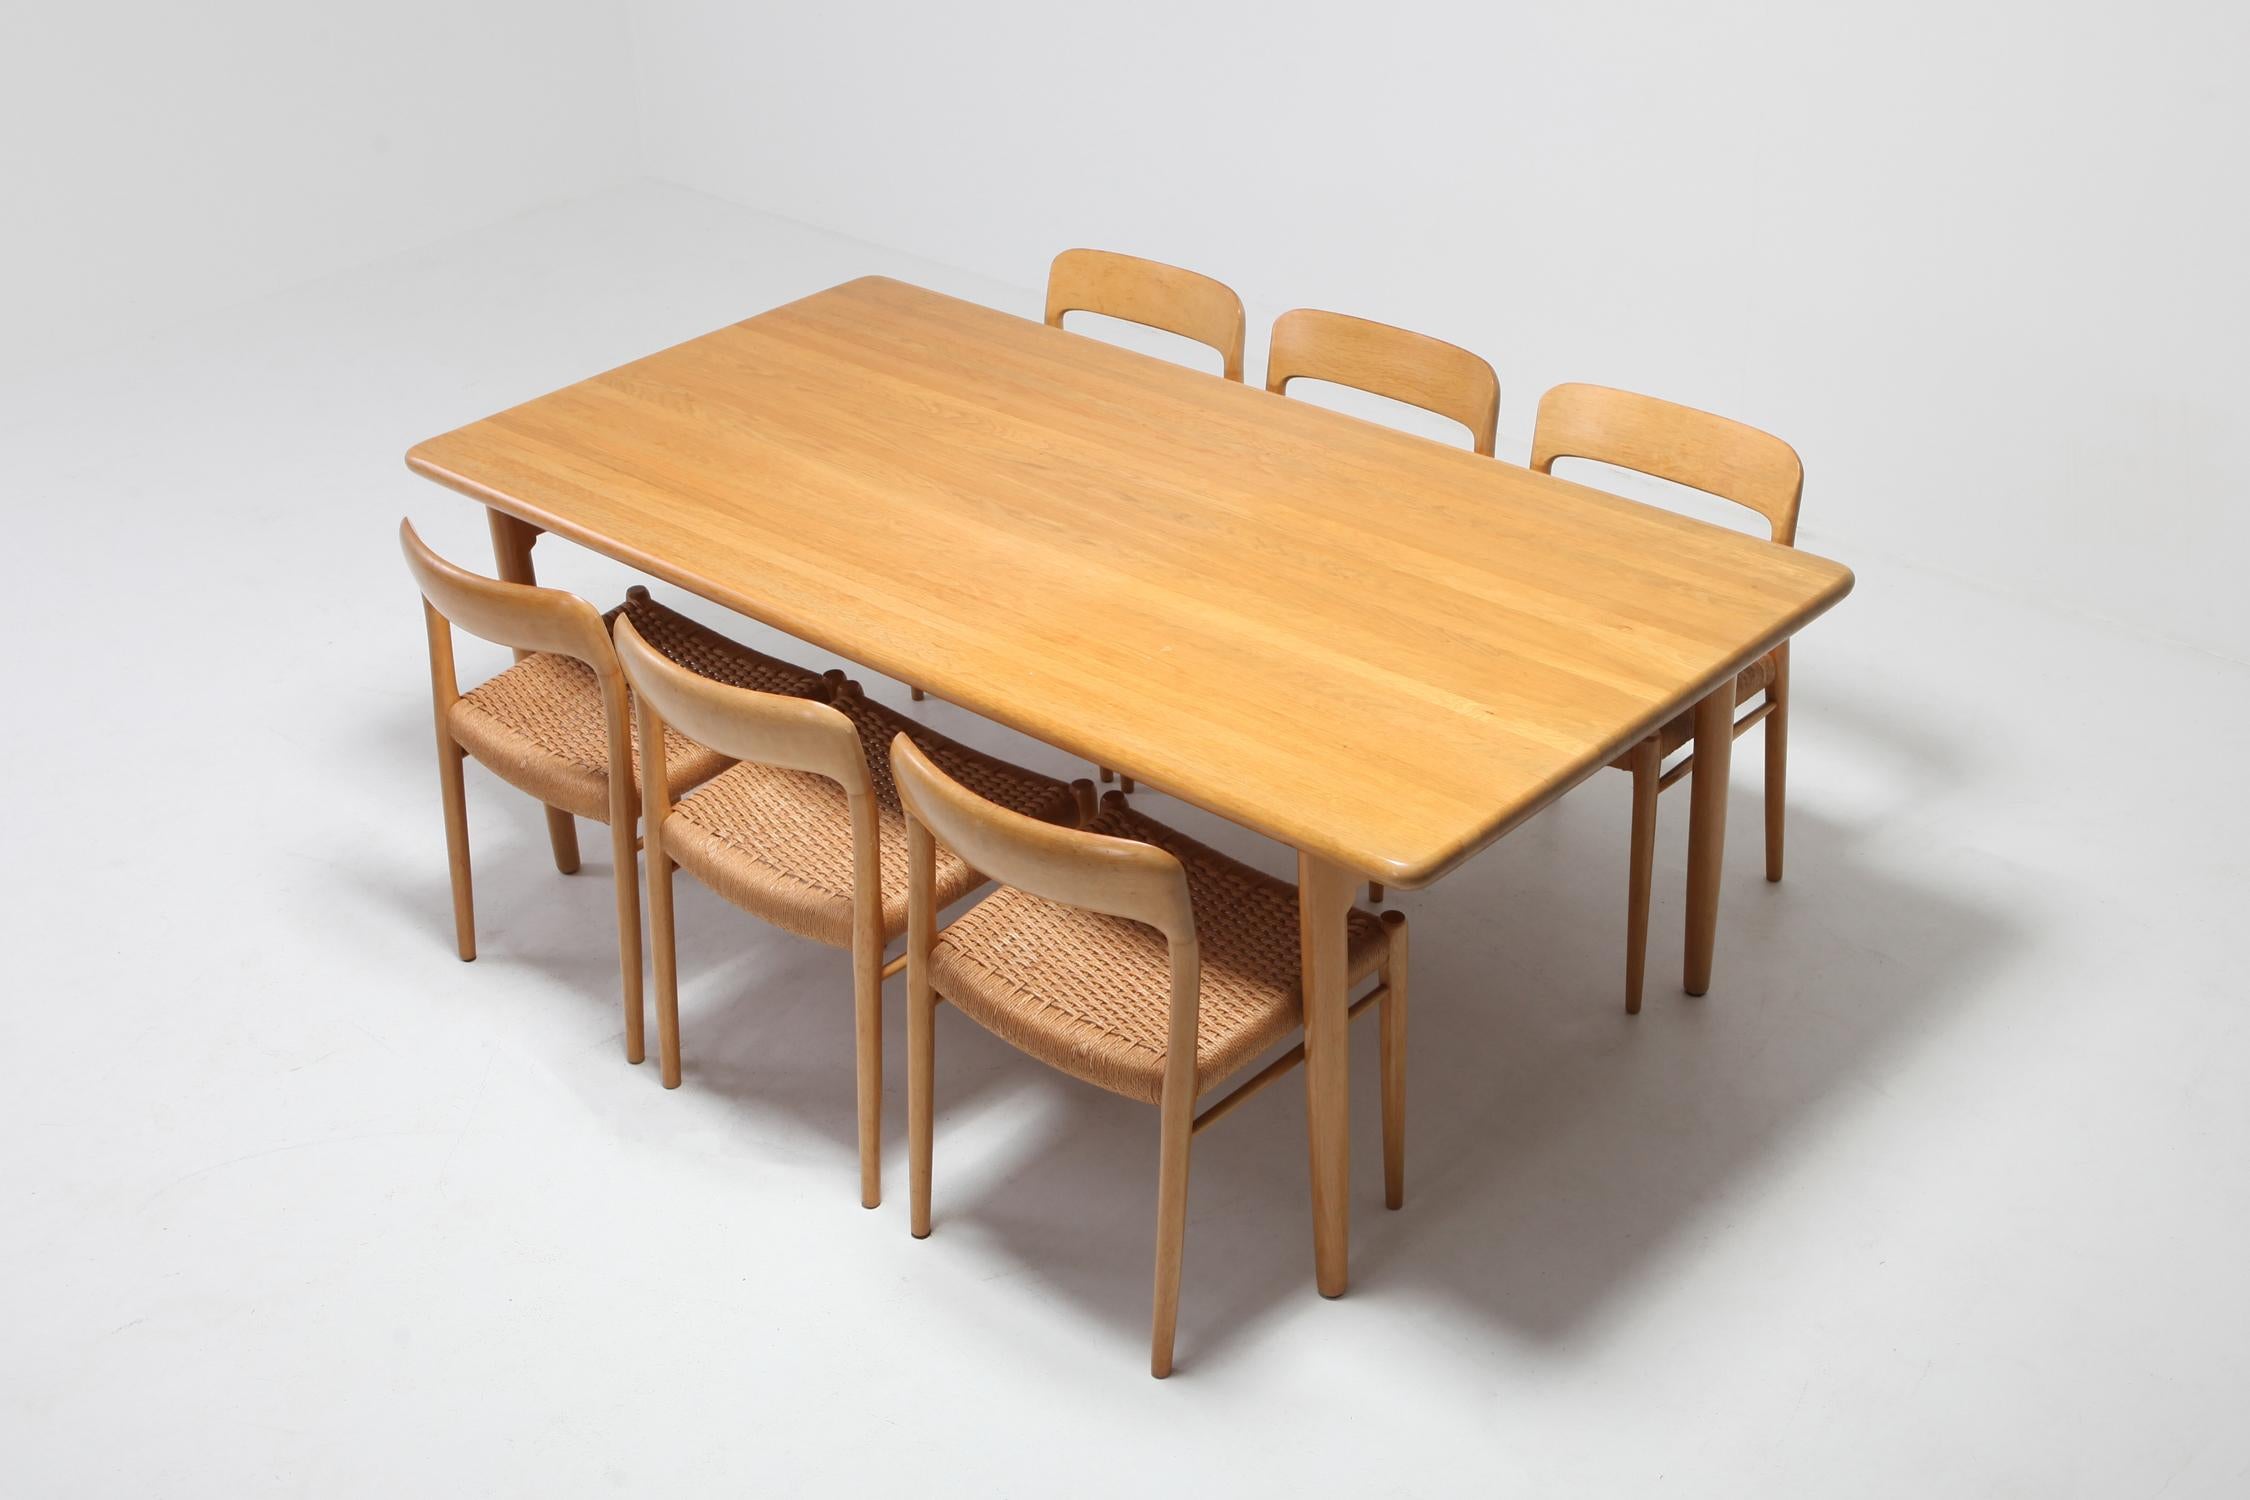 Dining table and chairs by Danish designer Niels Otto Møller, and manufactured by JL Møllers Møbelfabrik 
This is a rare edition in oak and with seating made of paper cord. 
Condition: The chairs are offered in excellent original condition with